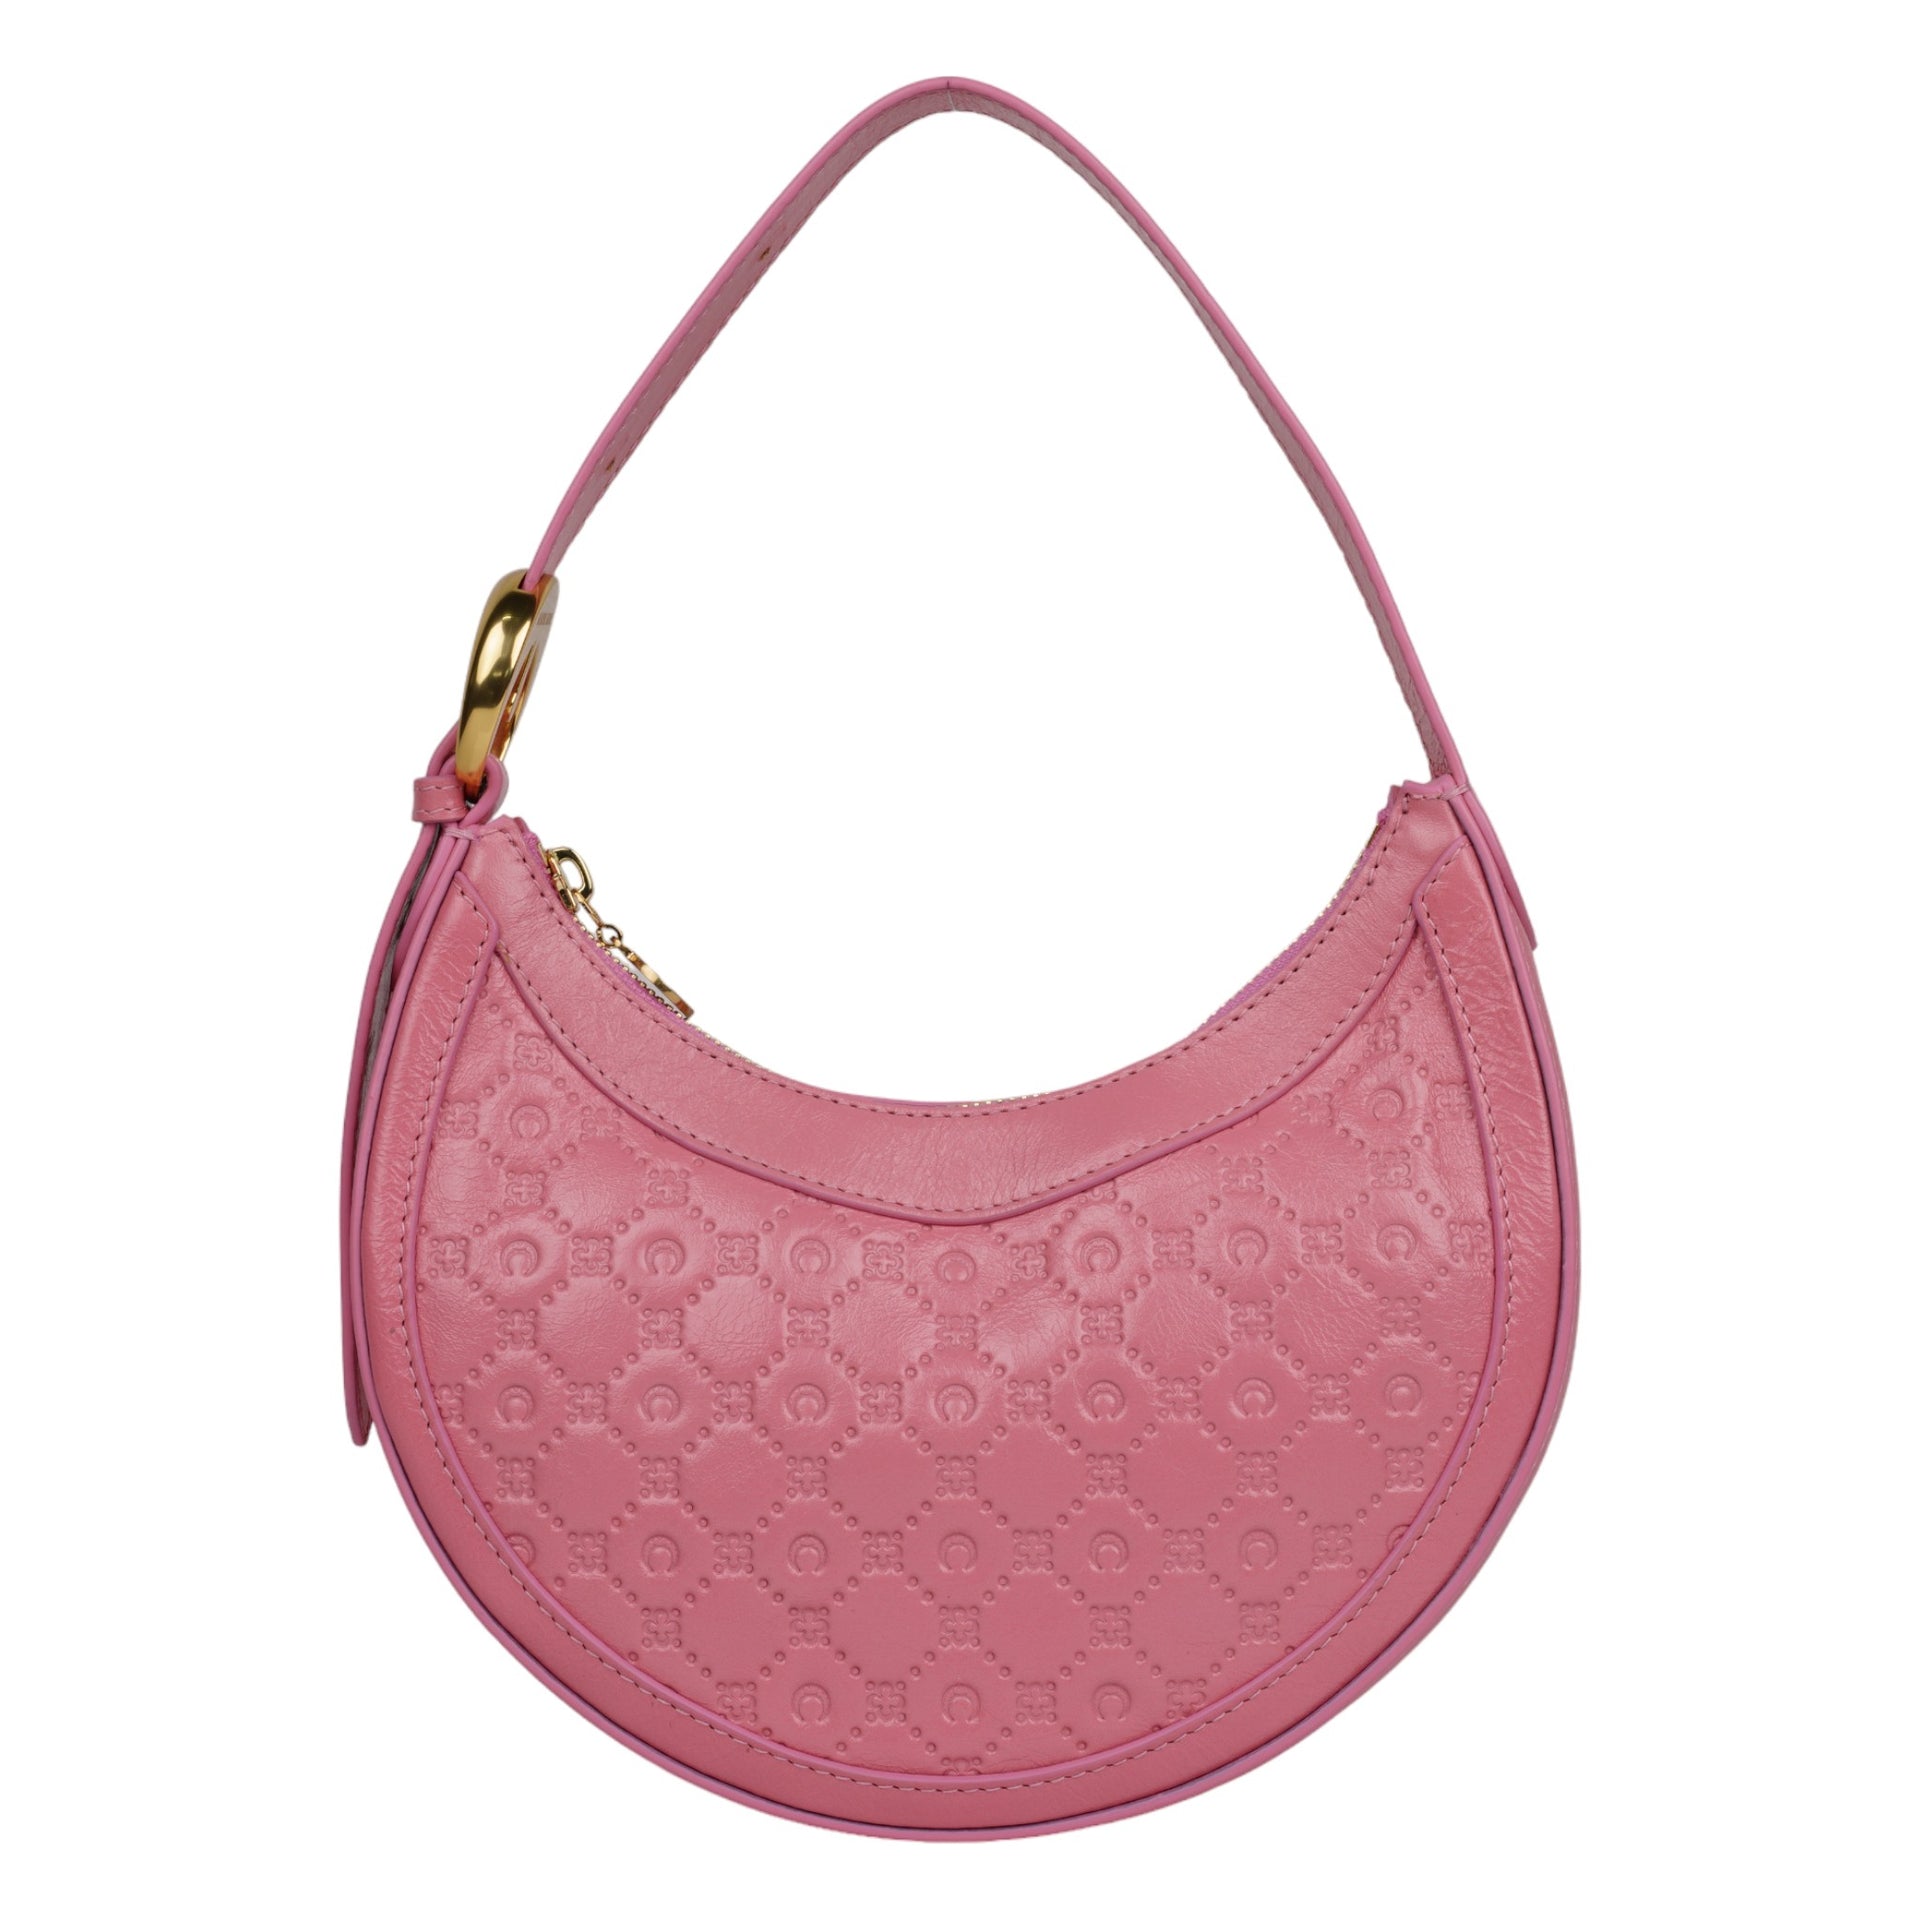 EMBOSSED LEATHER ECLIPS MINI / PK30:PINK